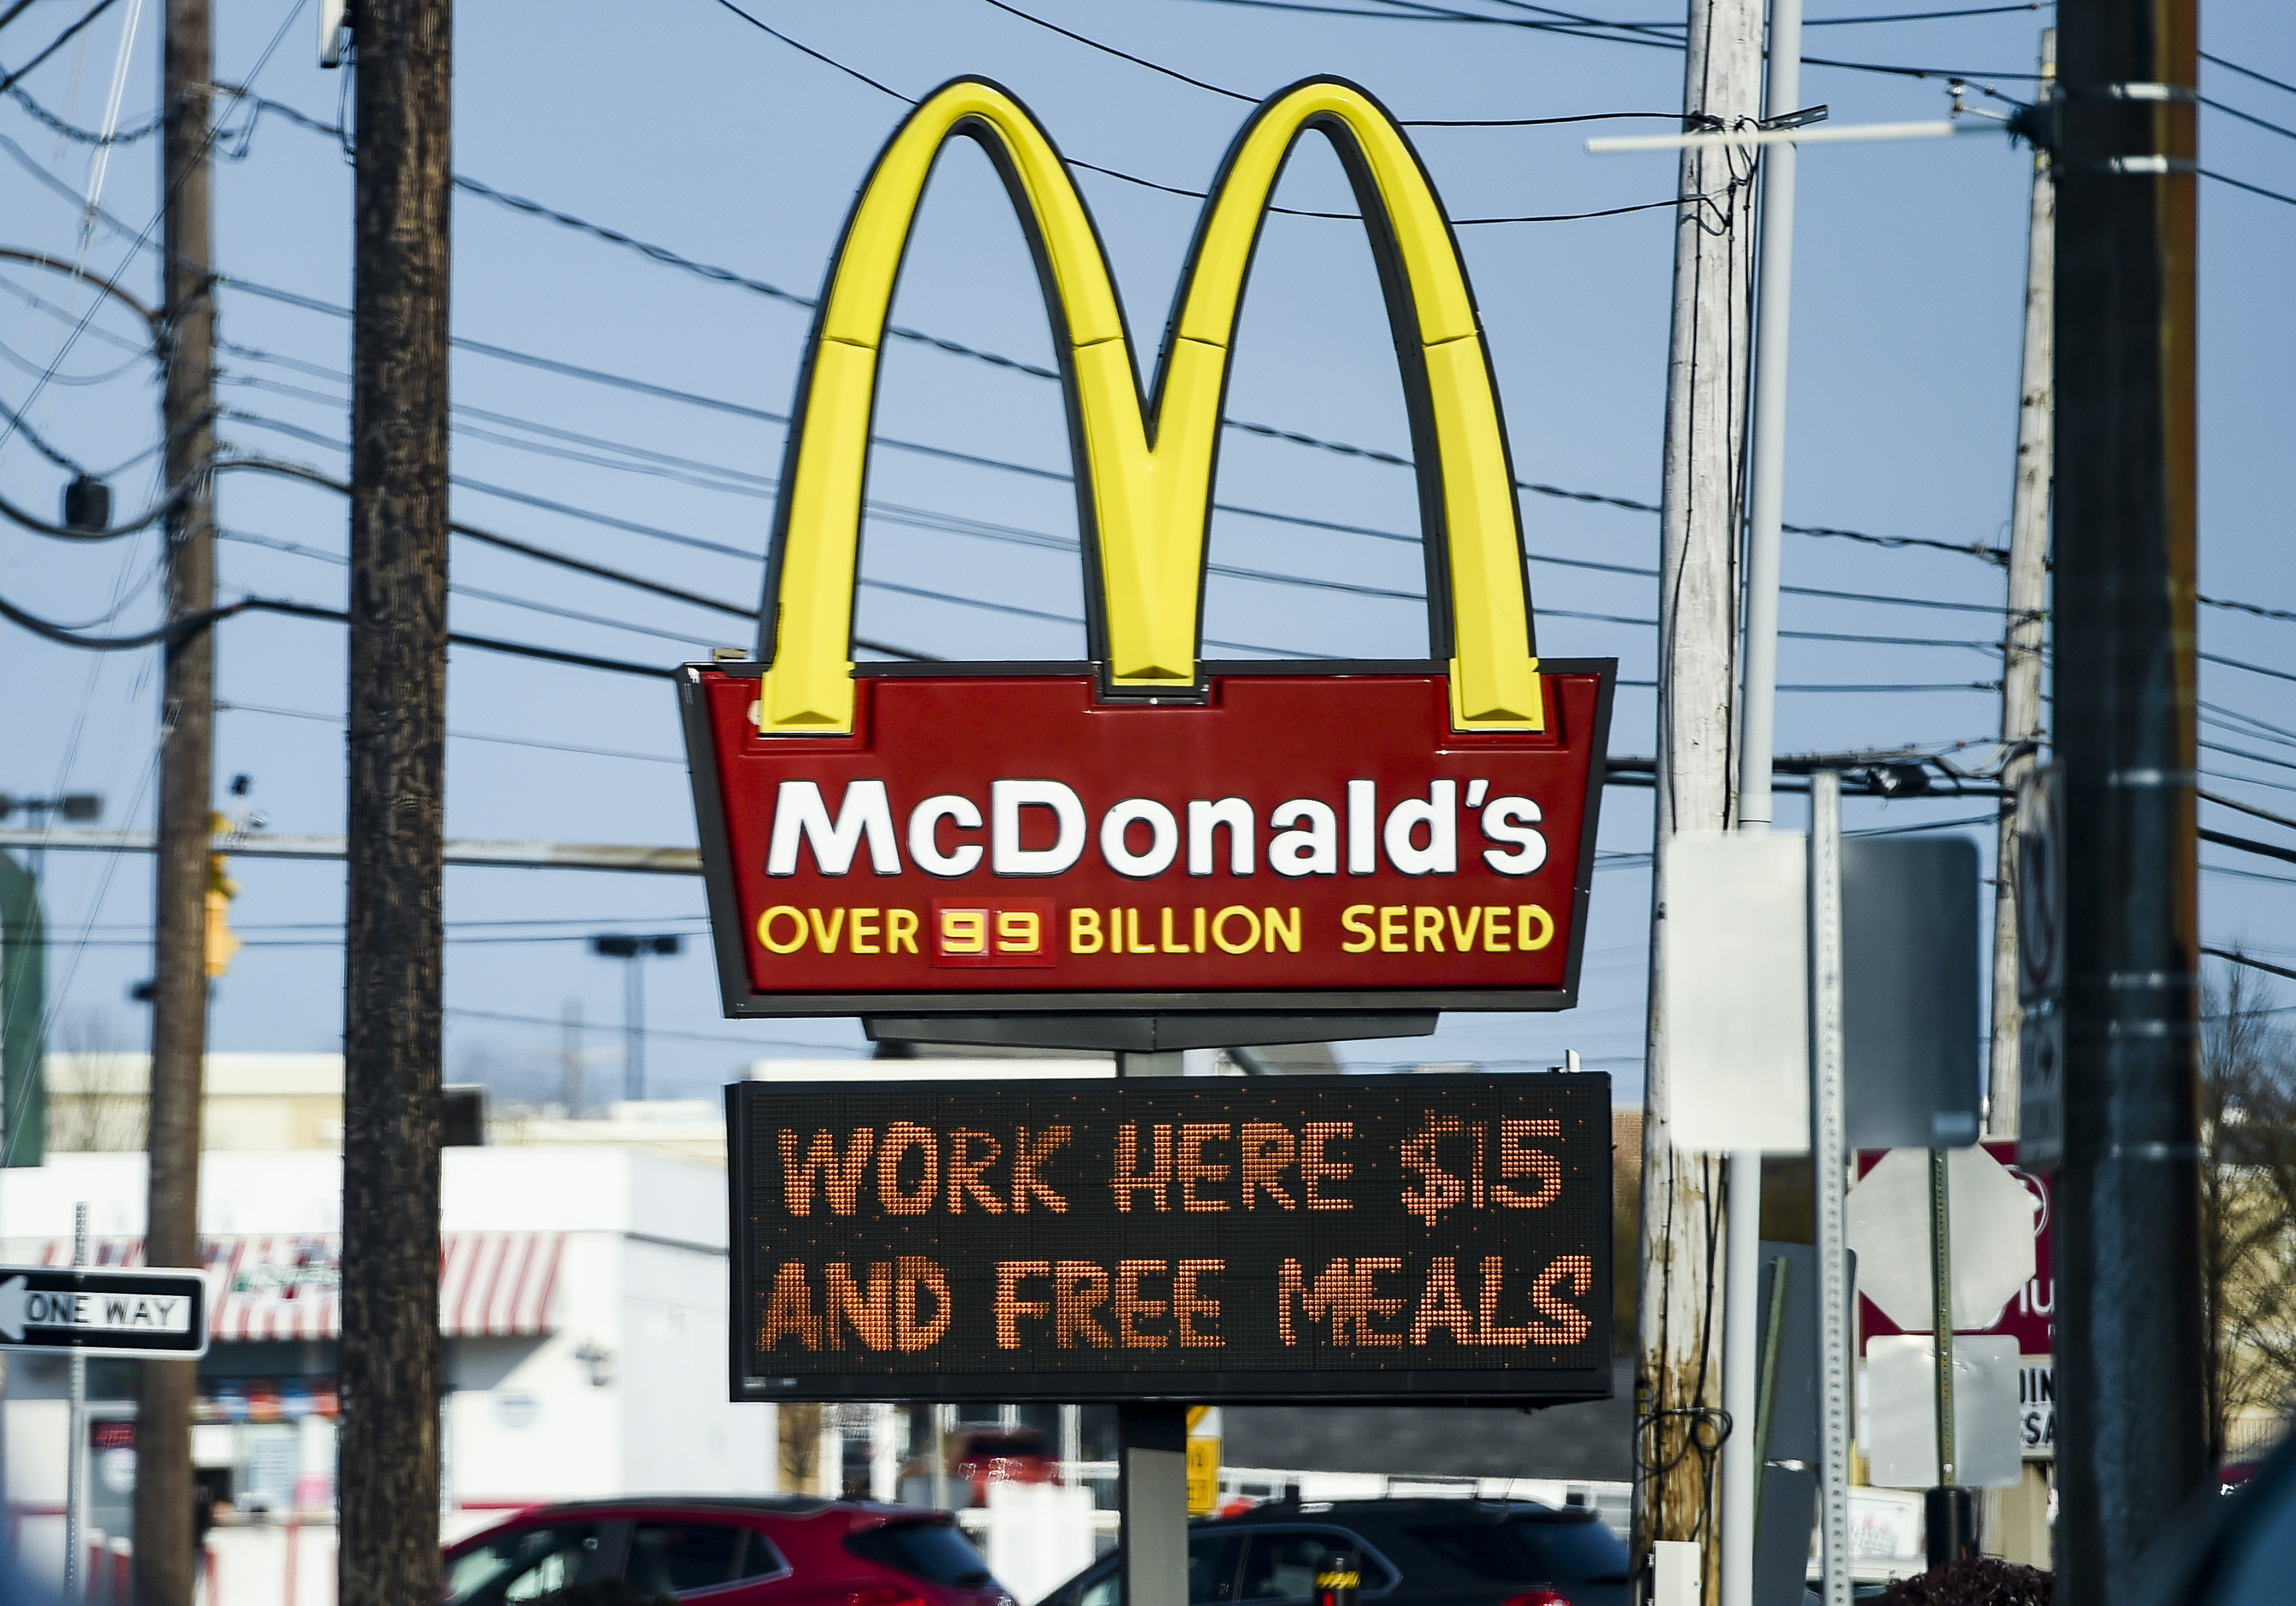 A McDonald’s sign advertising jobs for $15 an hour and free meals.